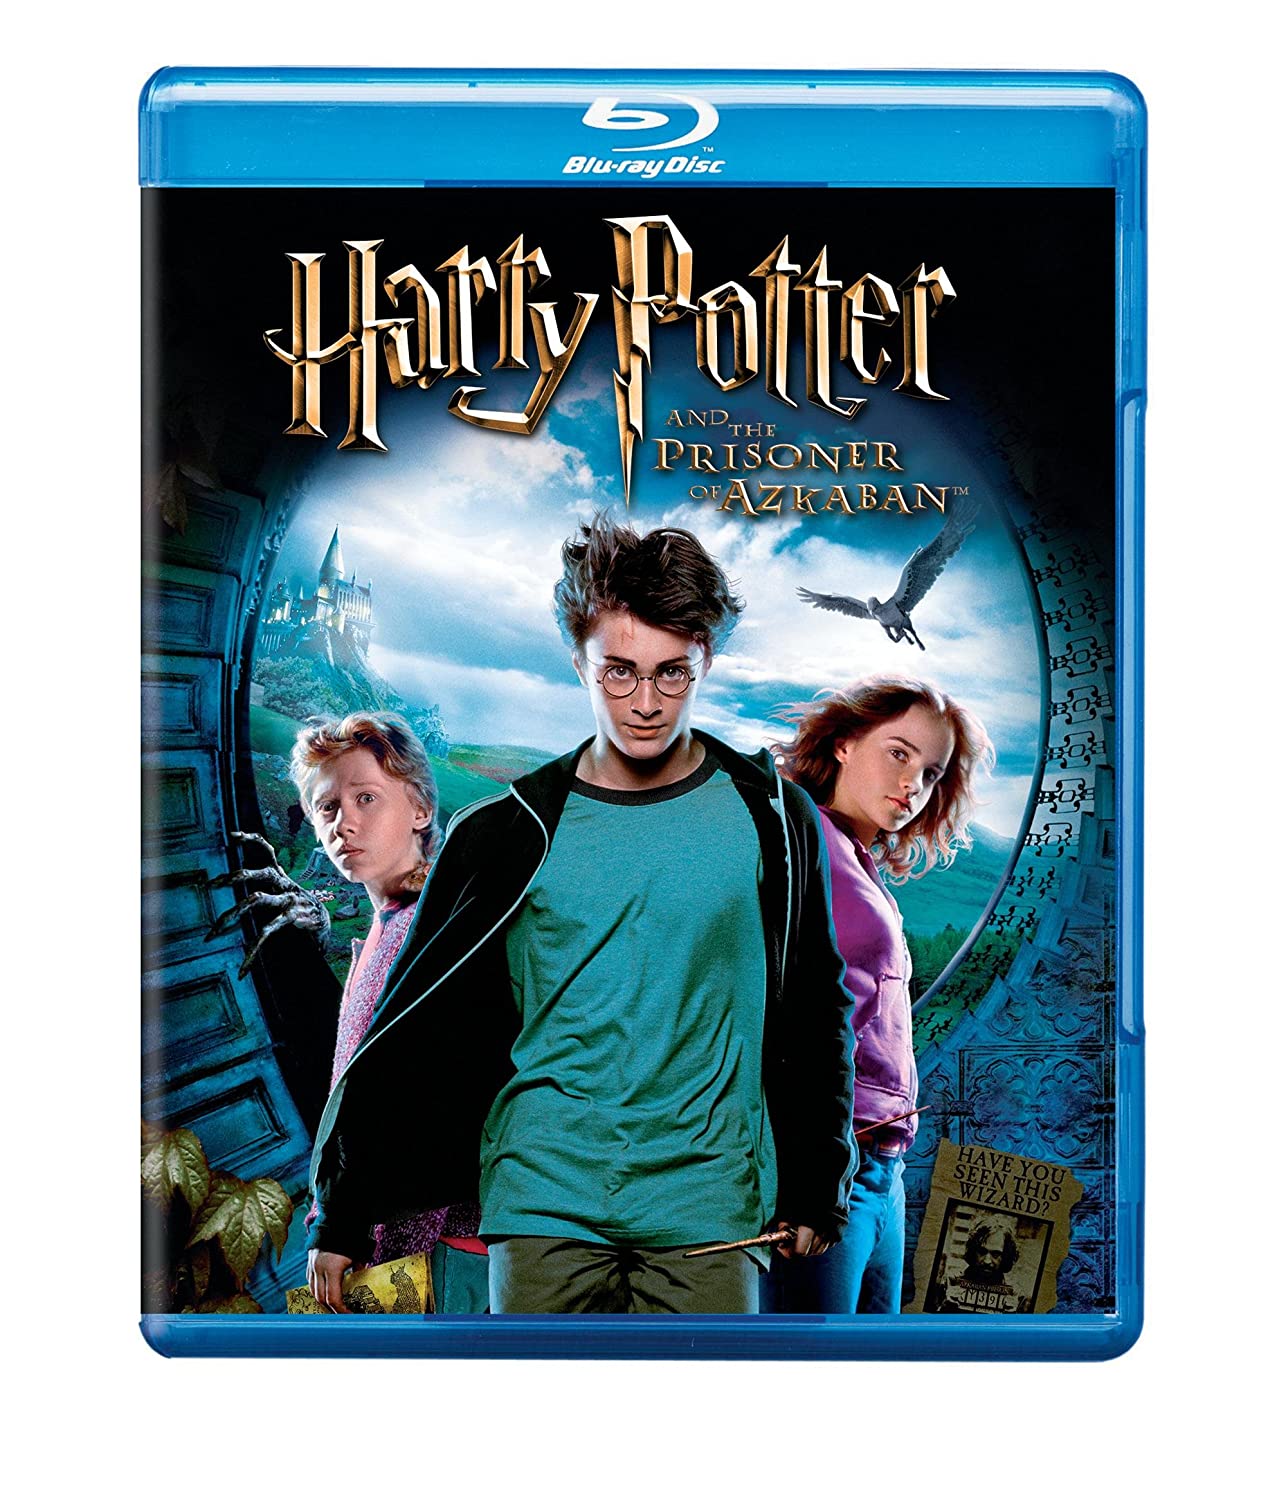 Harry Potter and the Prisoner of Azkaban - Blu-ray (Used Once)